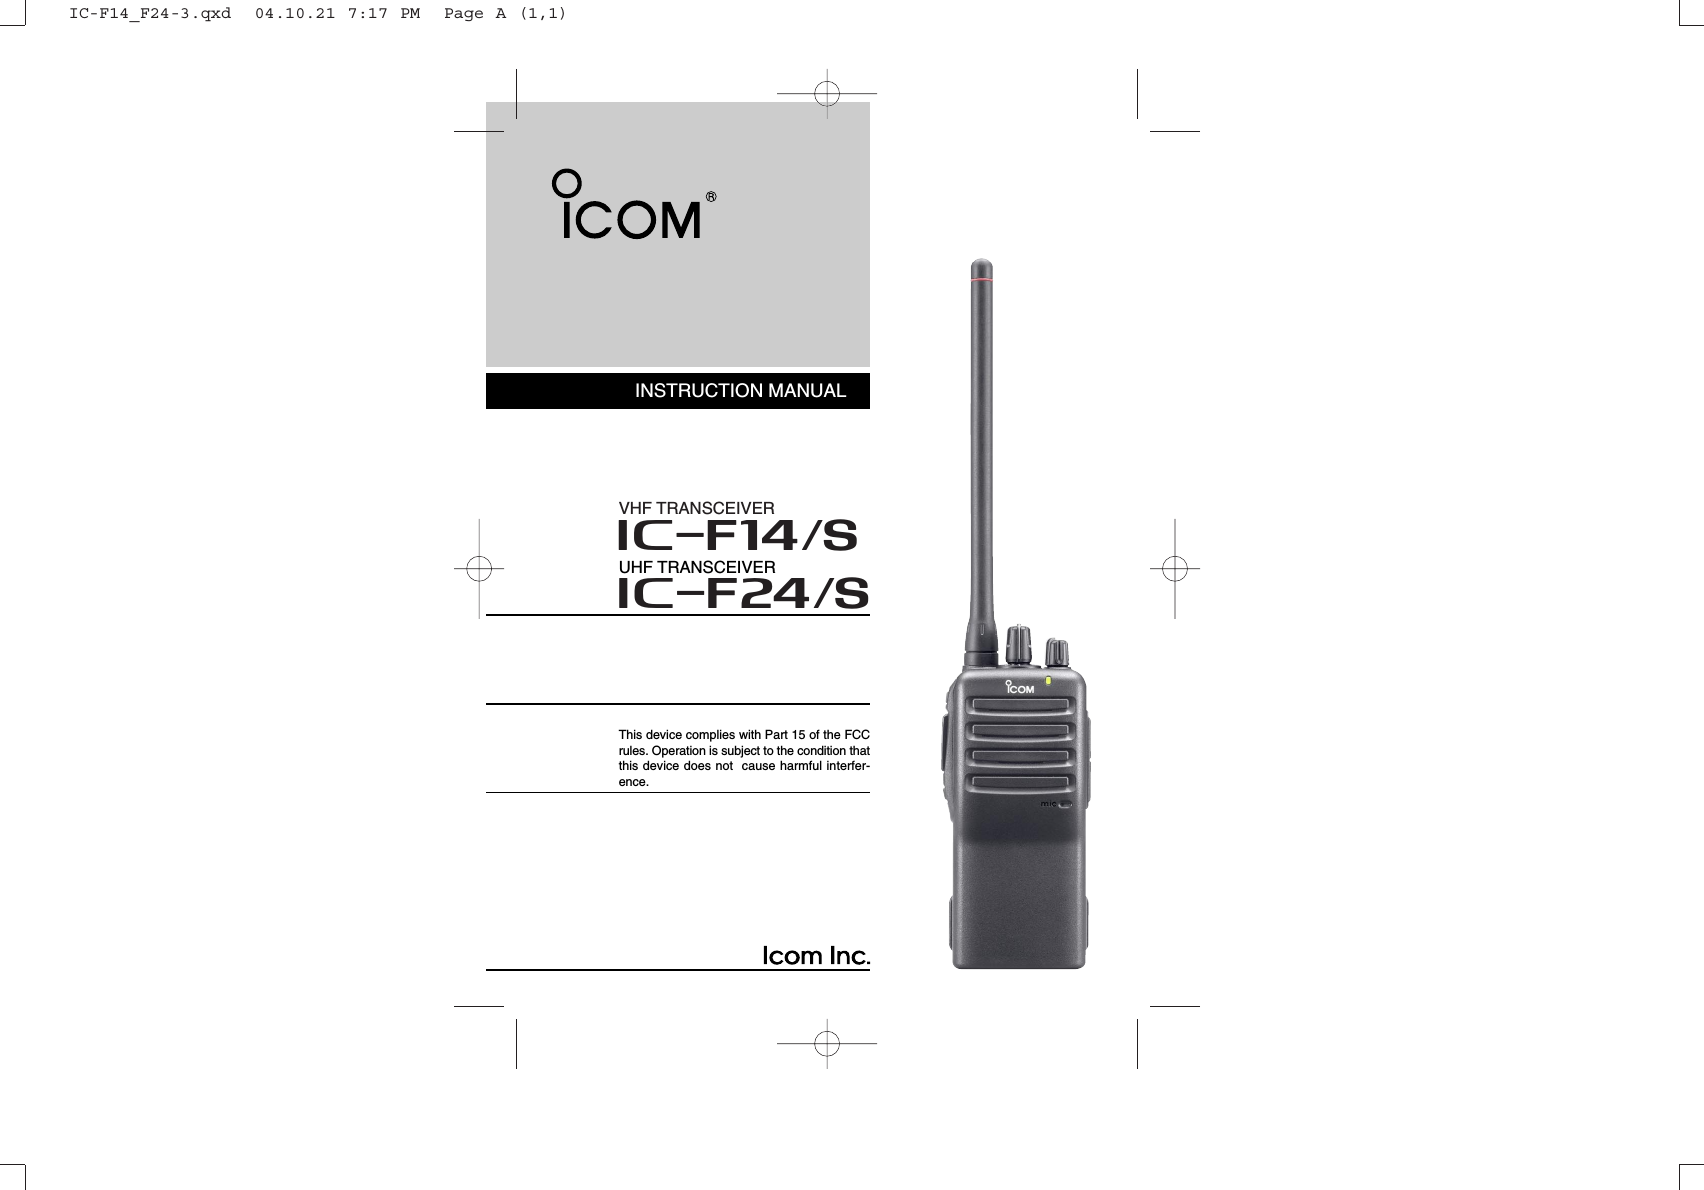 INSTRUCTION MANUALThis device complies with Part 15 of the FCCrules. Operation is subject to the condition thatthis device does not  cause harmful interfer-ence.UHF TRANSCEIVERiF24/SVHF TRANSCEIVERiF14/SIC-F14_F24-3.qxd  04.10.21 7:17 PM  Page A (1,1)